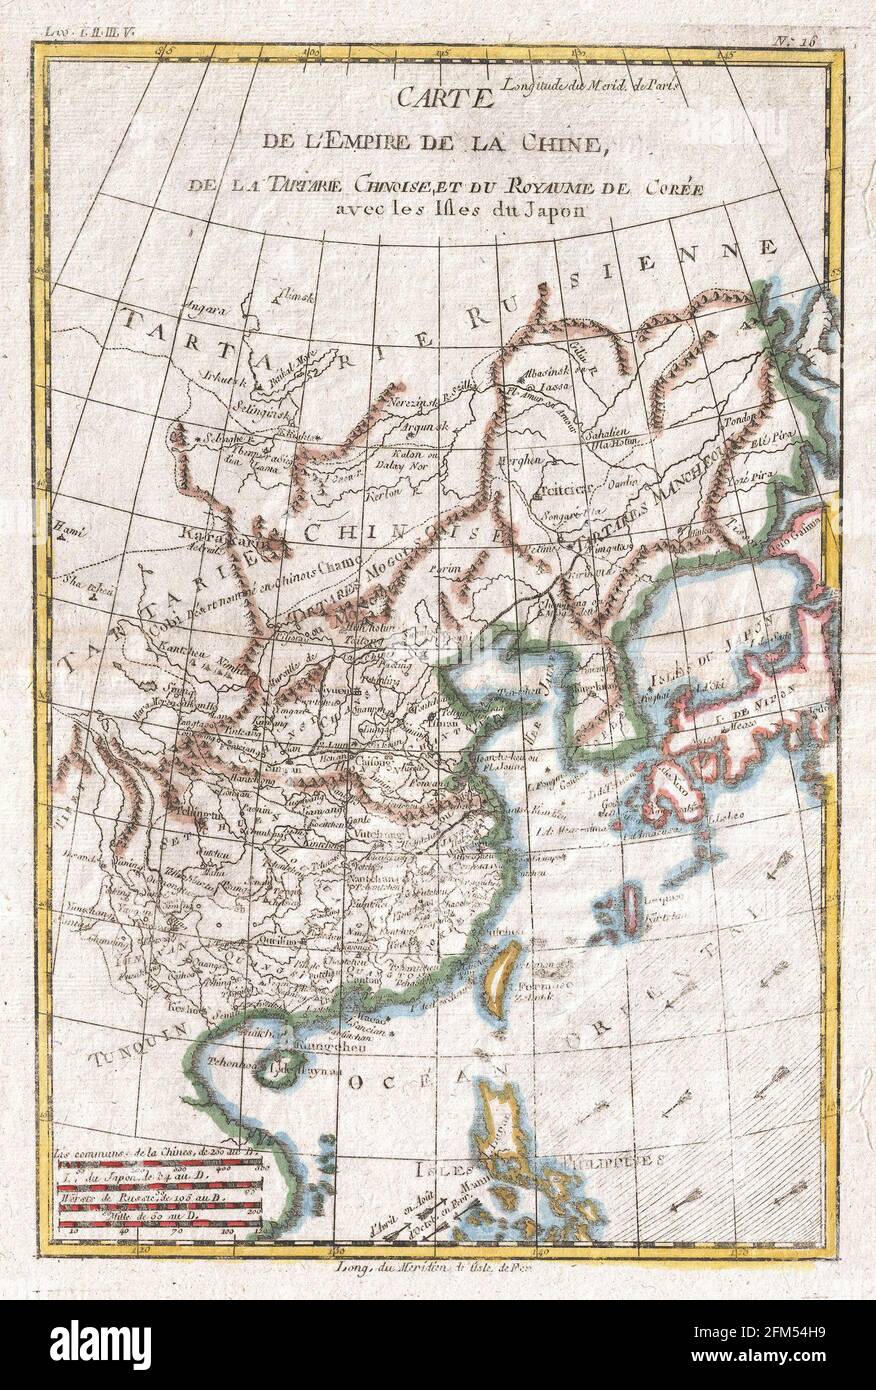 Vintage copper engraved map of China and Korea from 18th century. All maps are beautifully colored and illustrated showing the world at the time. Stock Photo